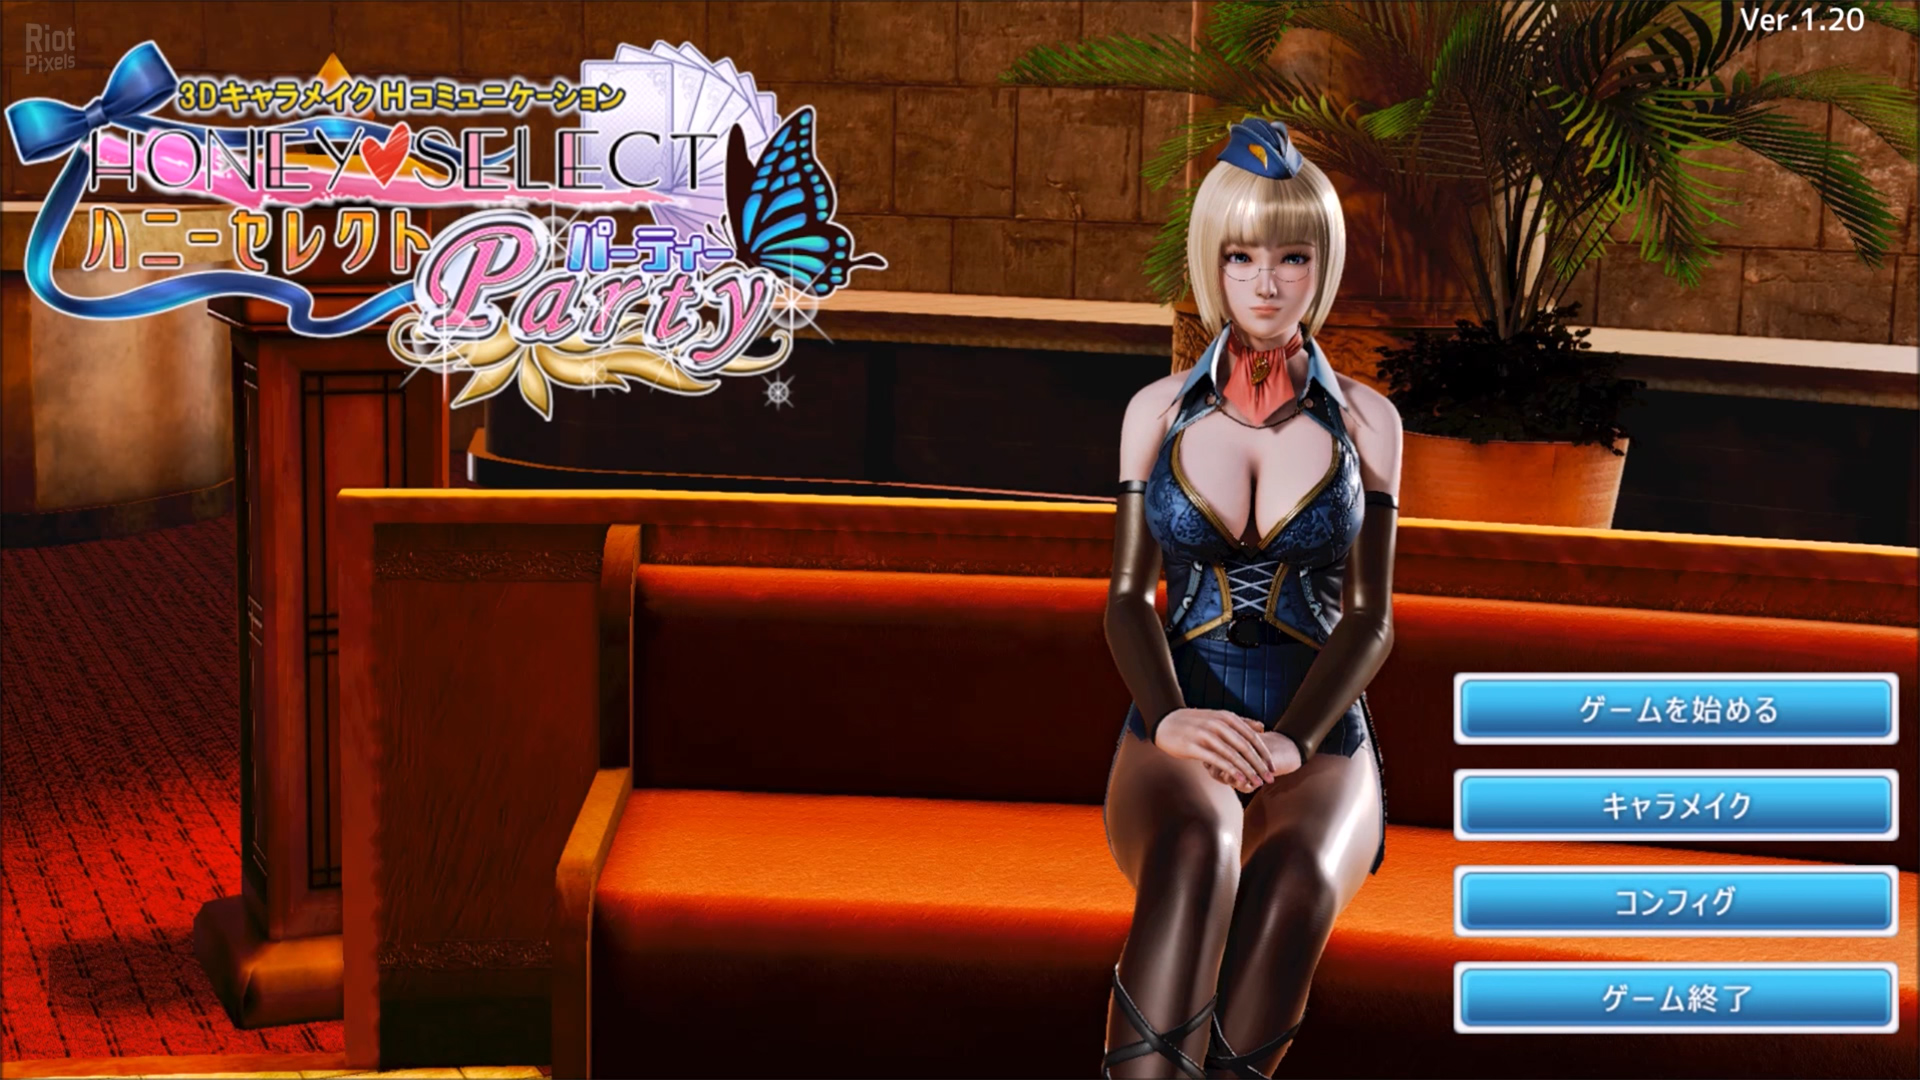 ahmed arsenal share honey select sitri h event photos